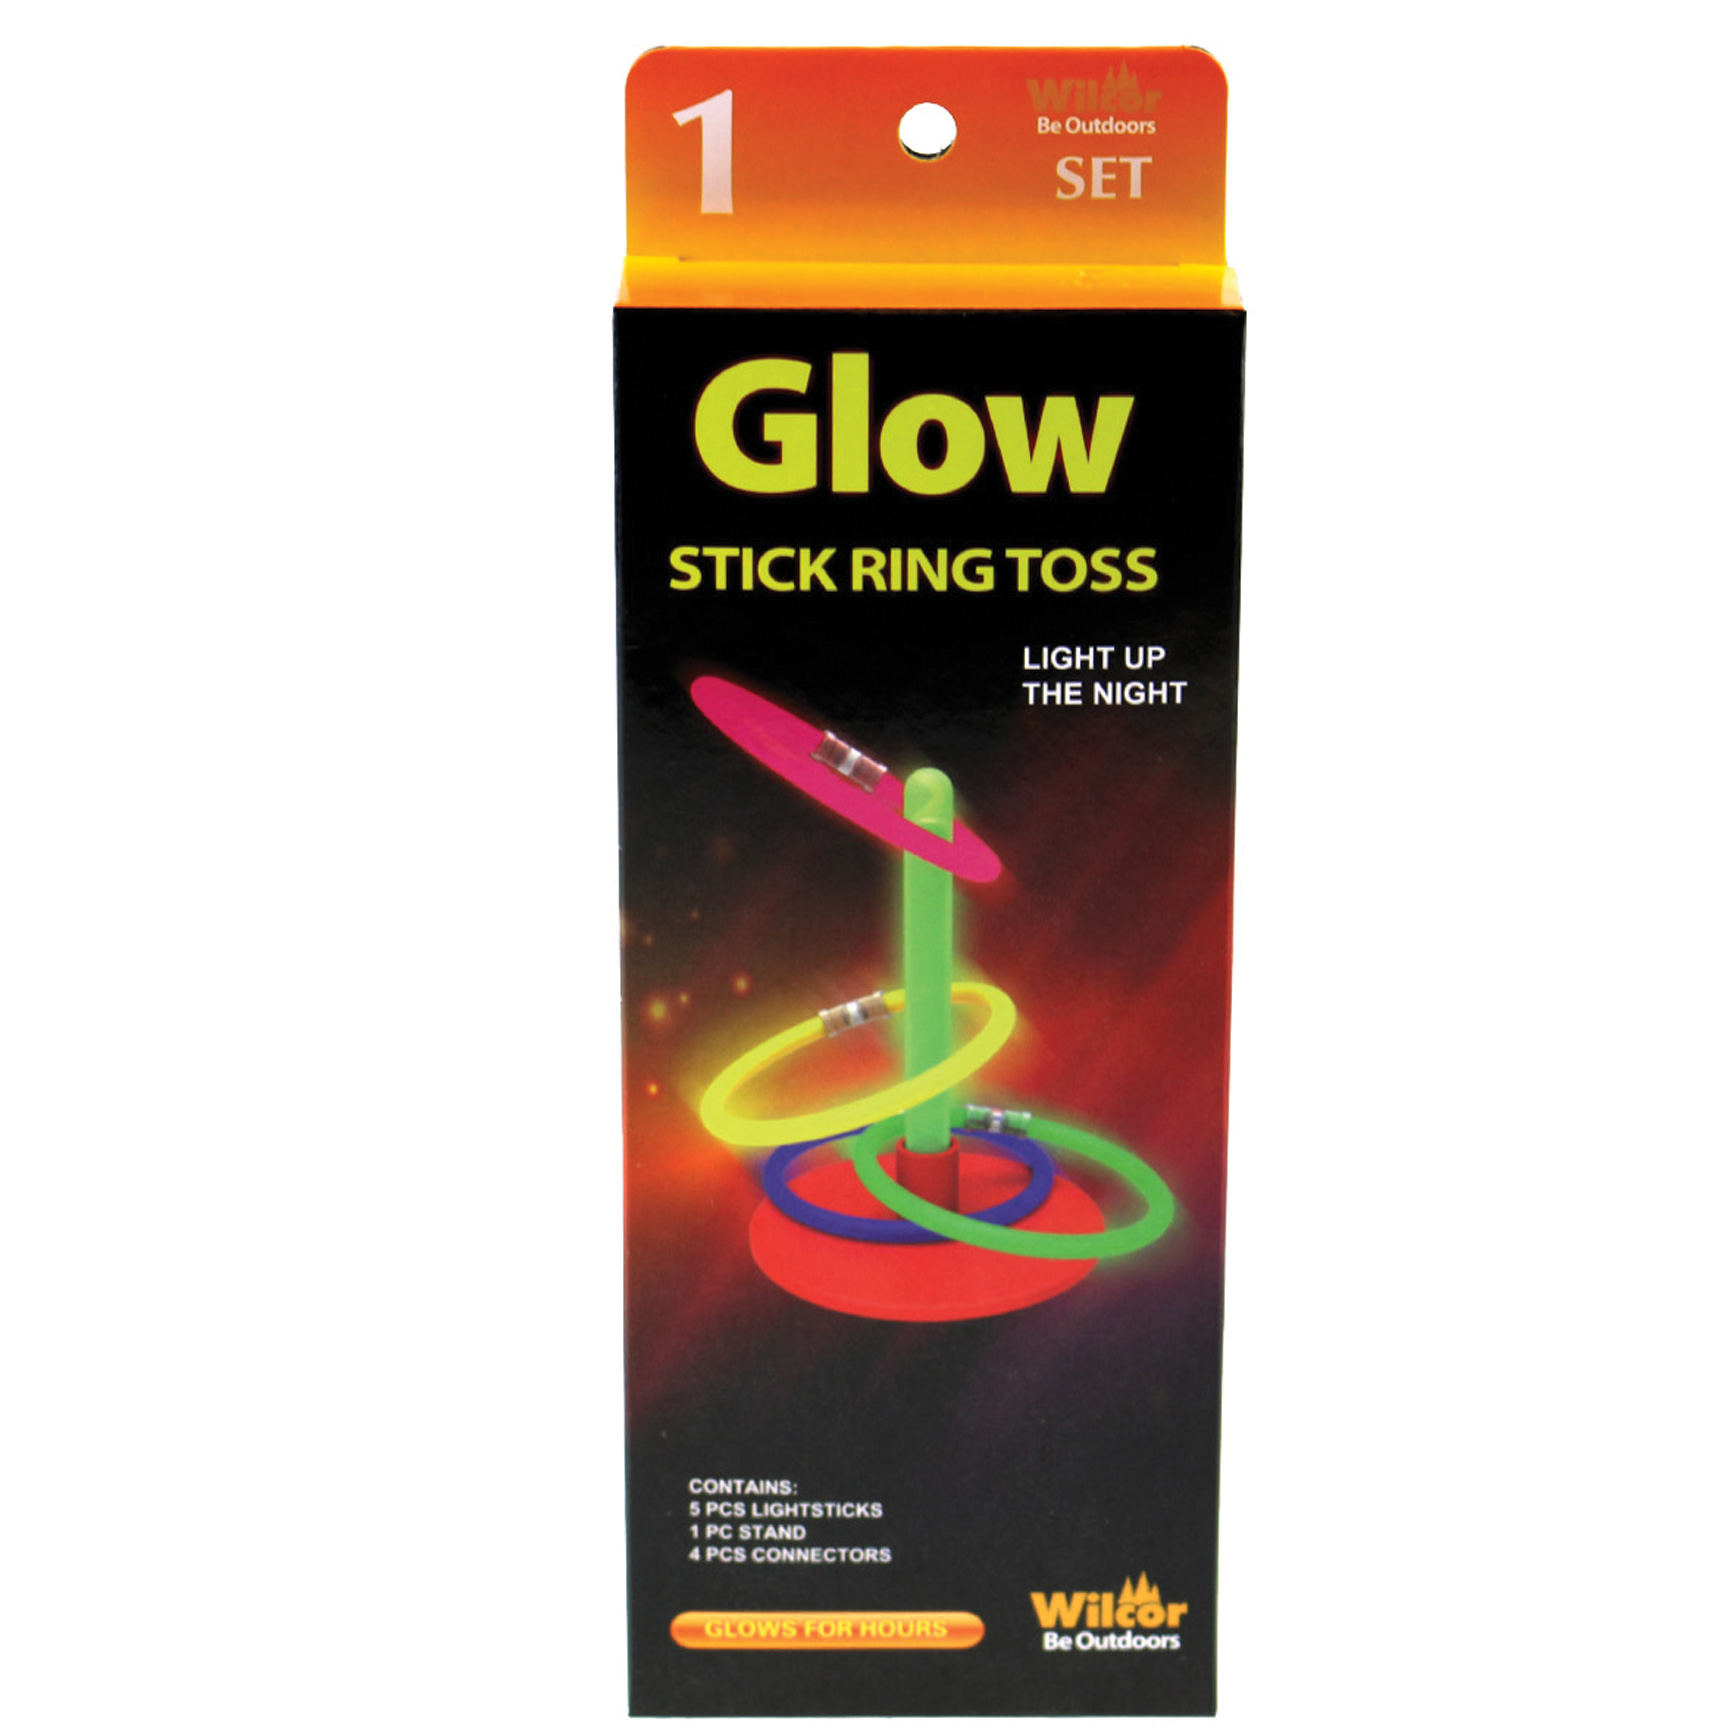 GLOW STICK RING TOSS 24/DS